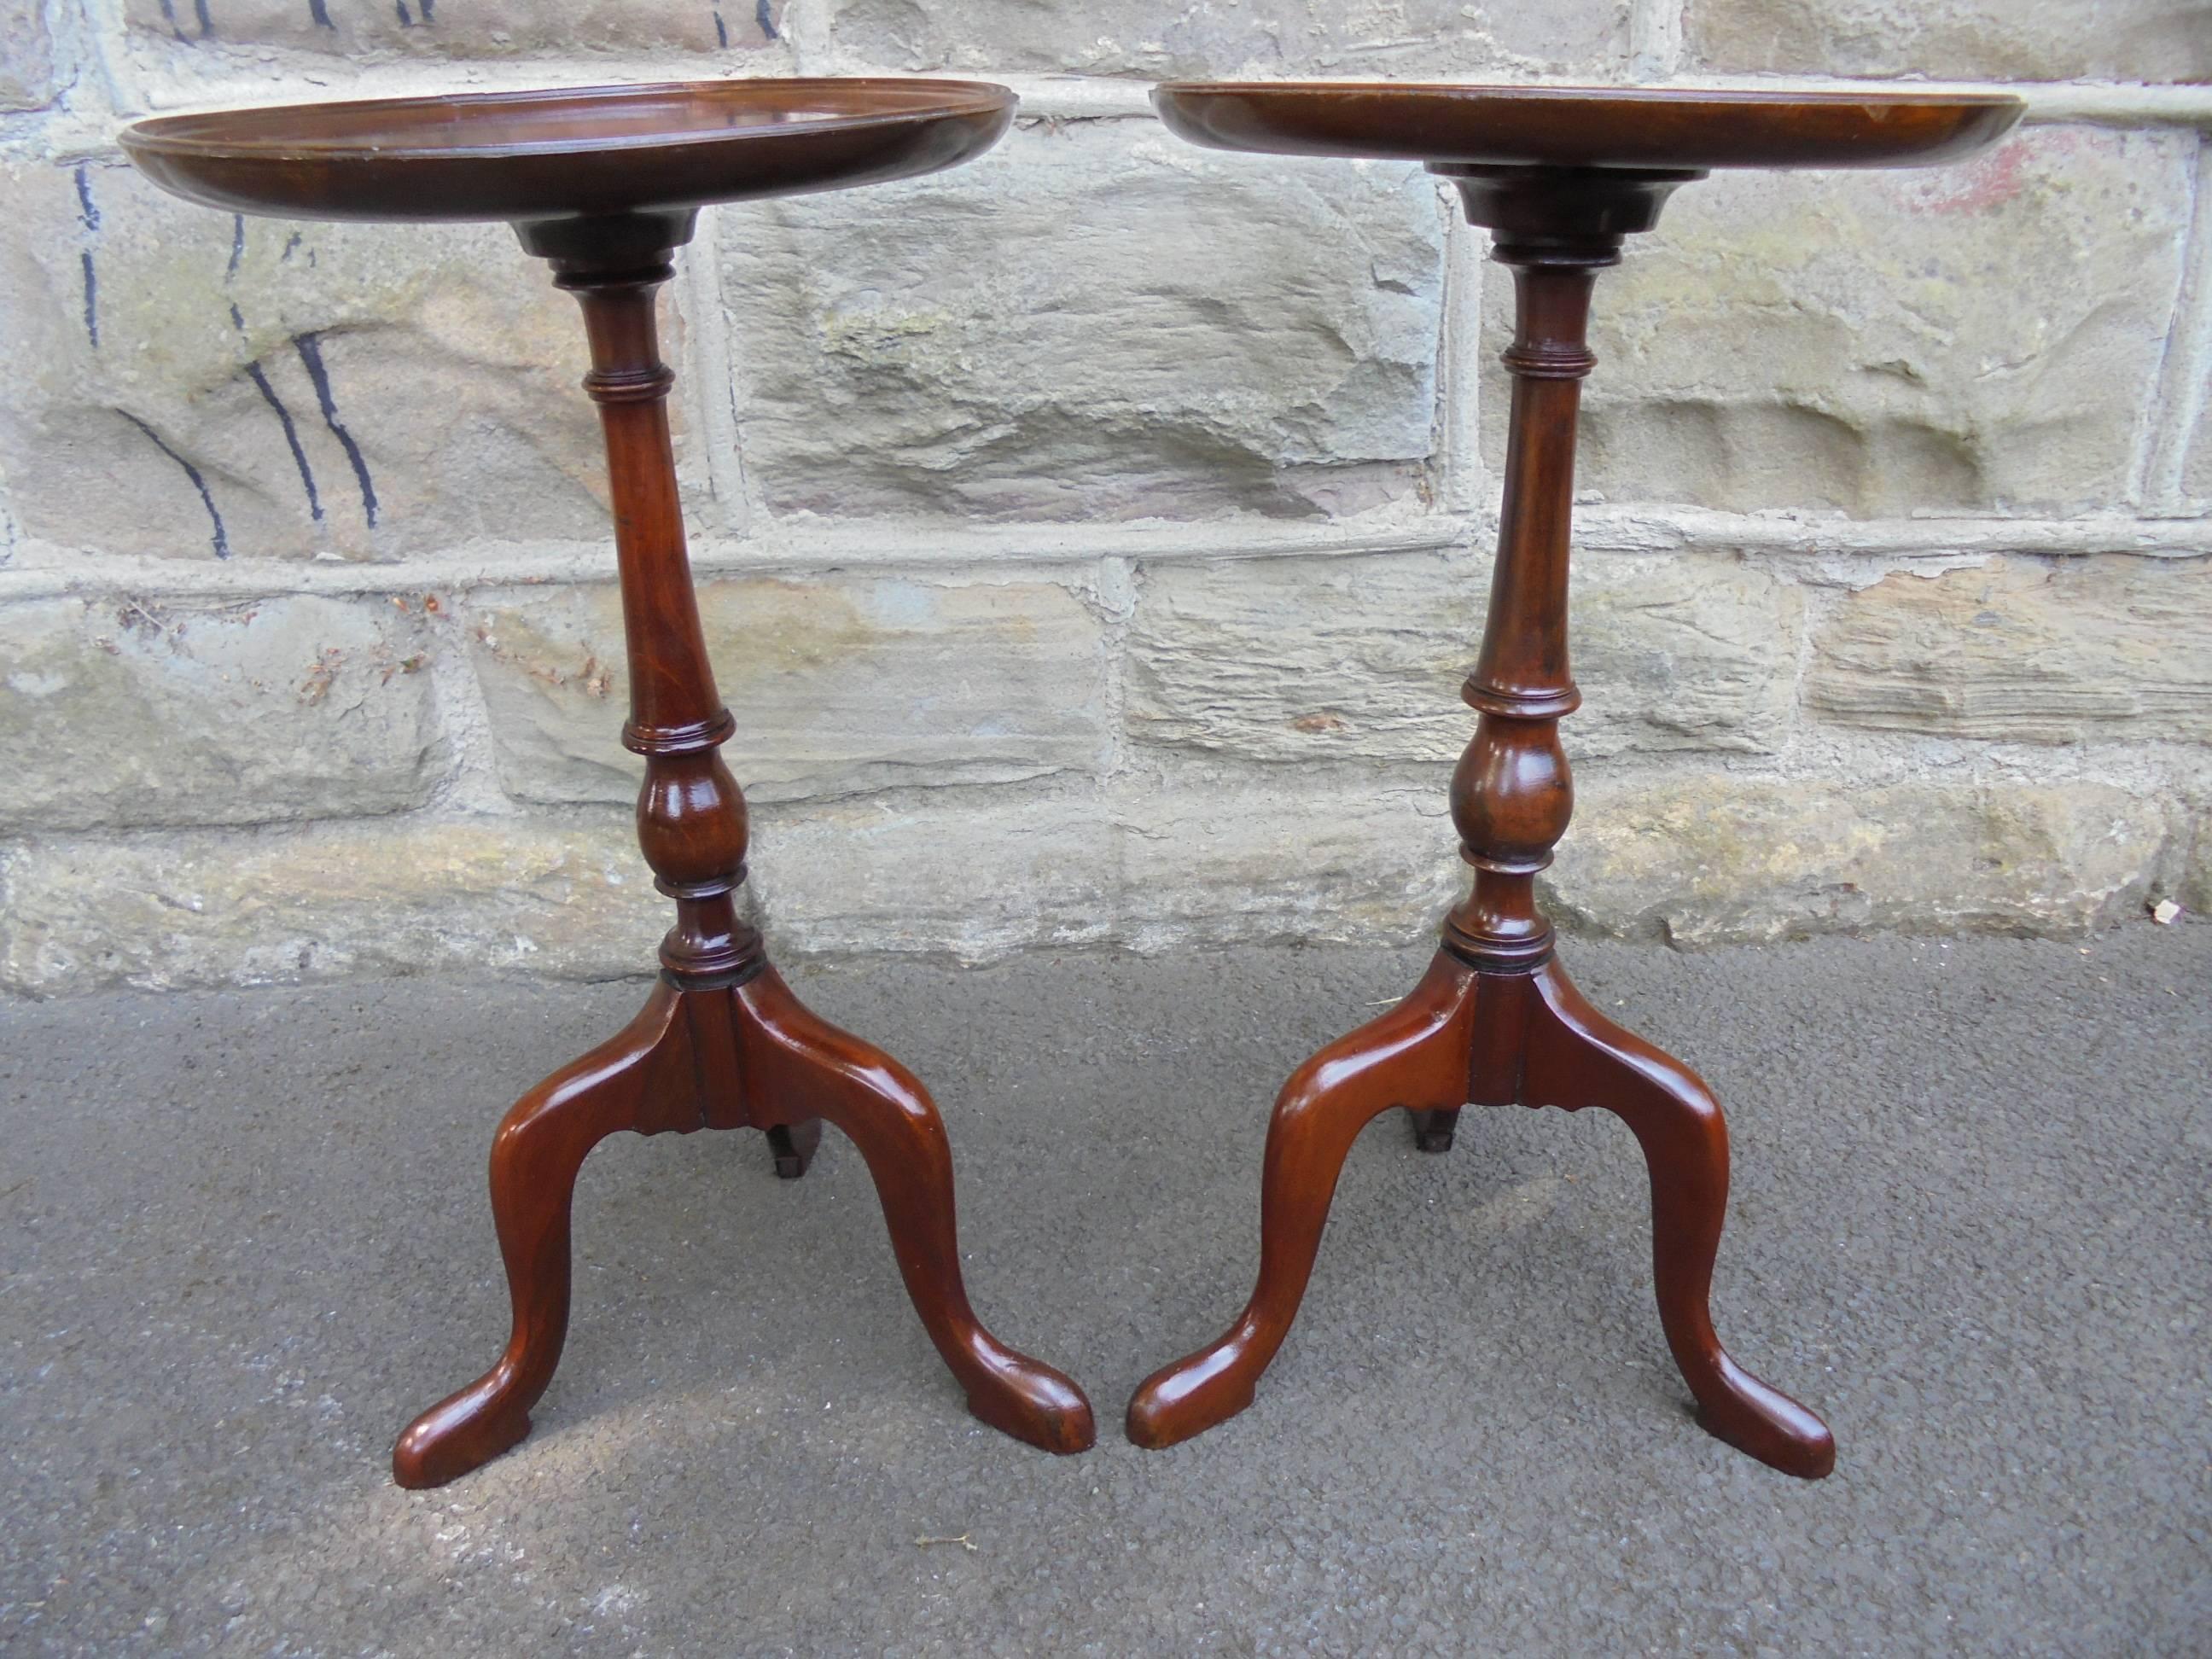 Pair of Edwardian Inlaid Mahogany Tripod Wine Tables In Good Condition For Sale In Wakefield, GB